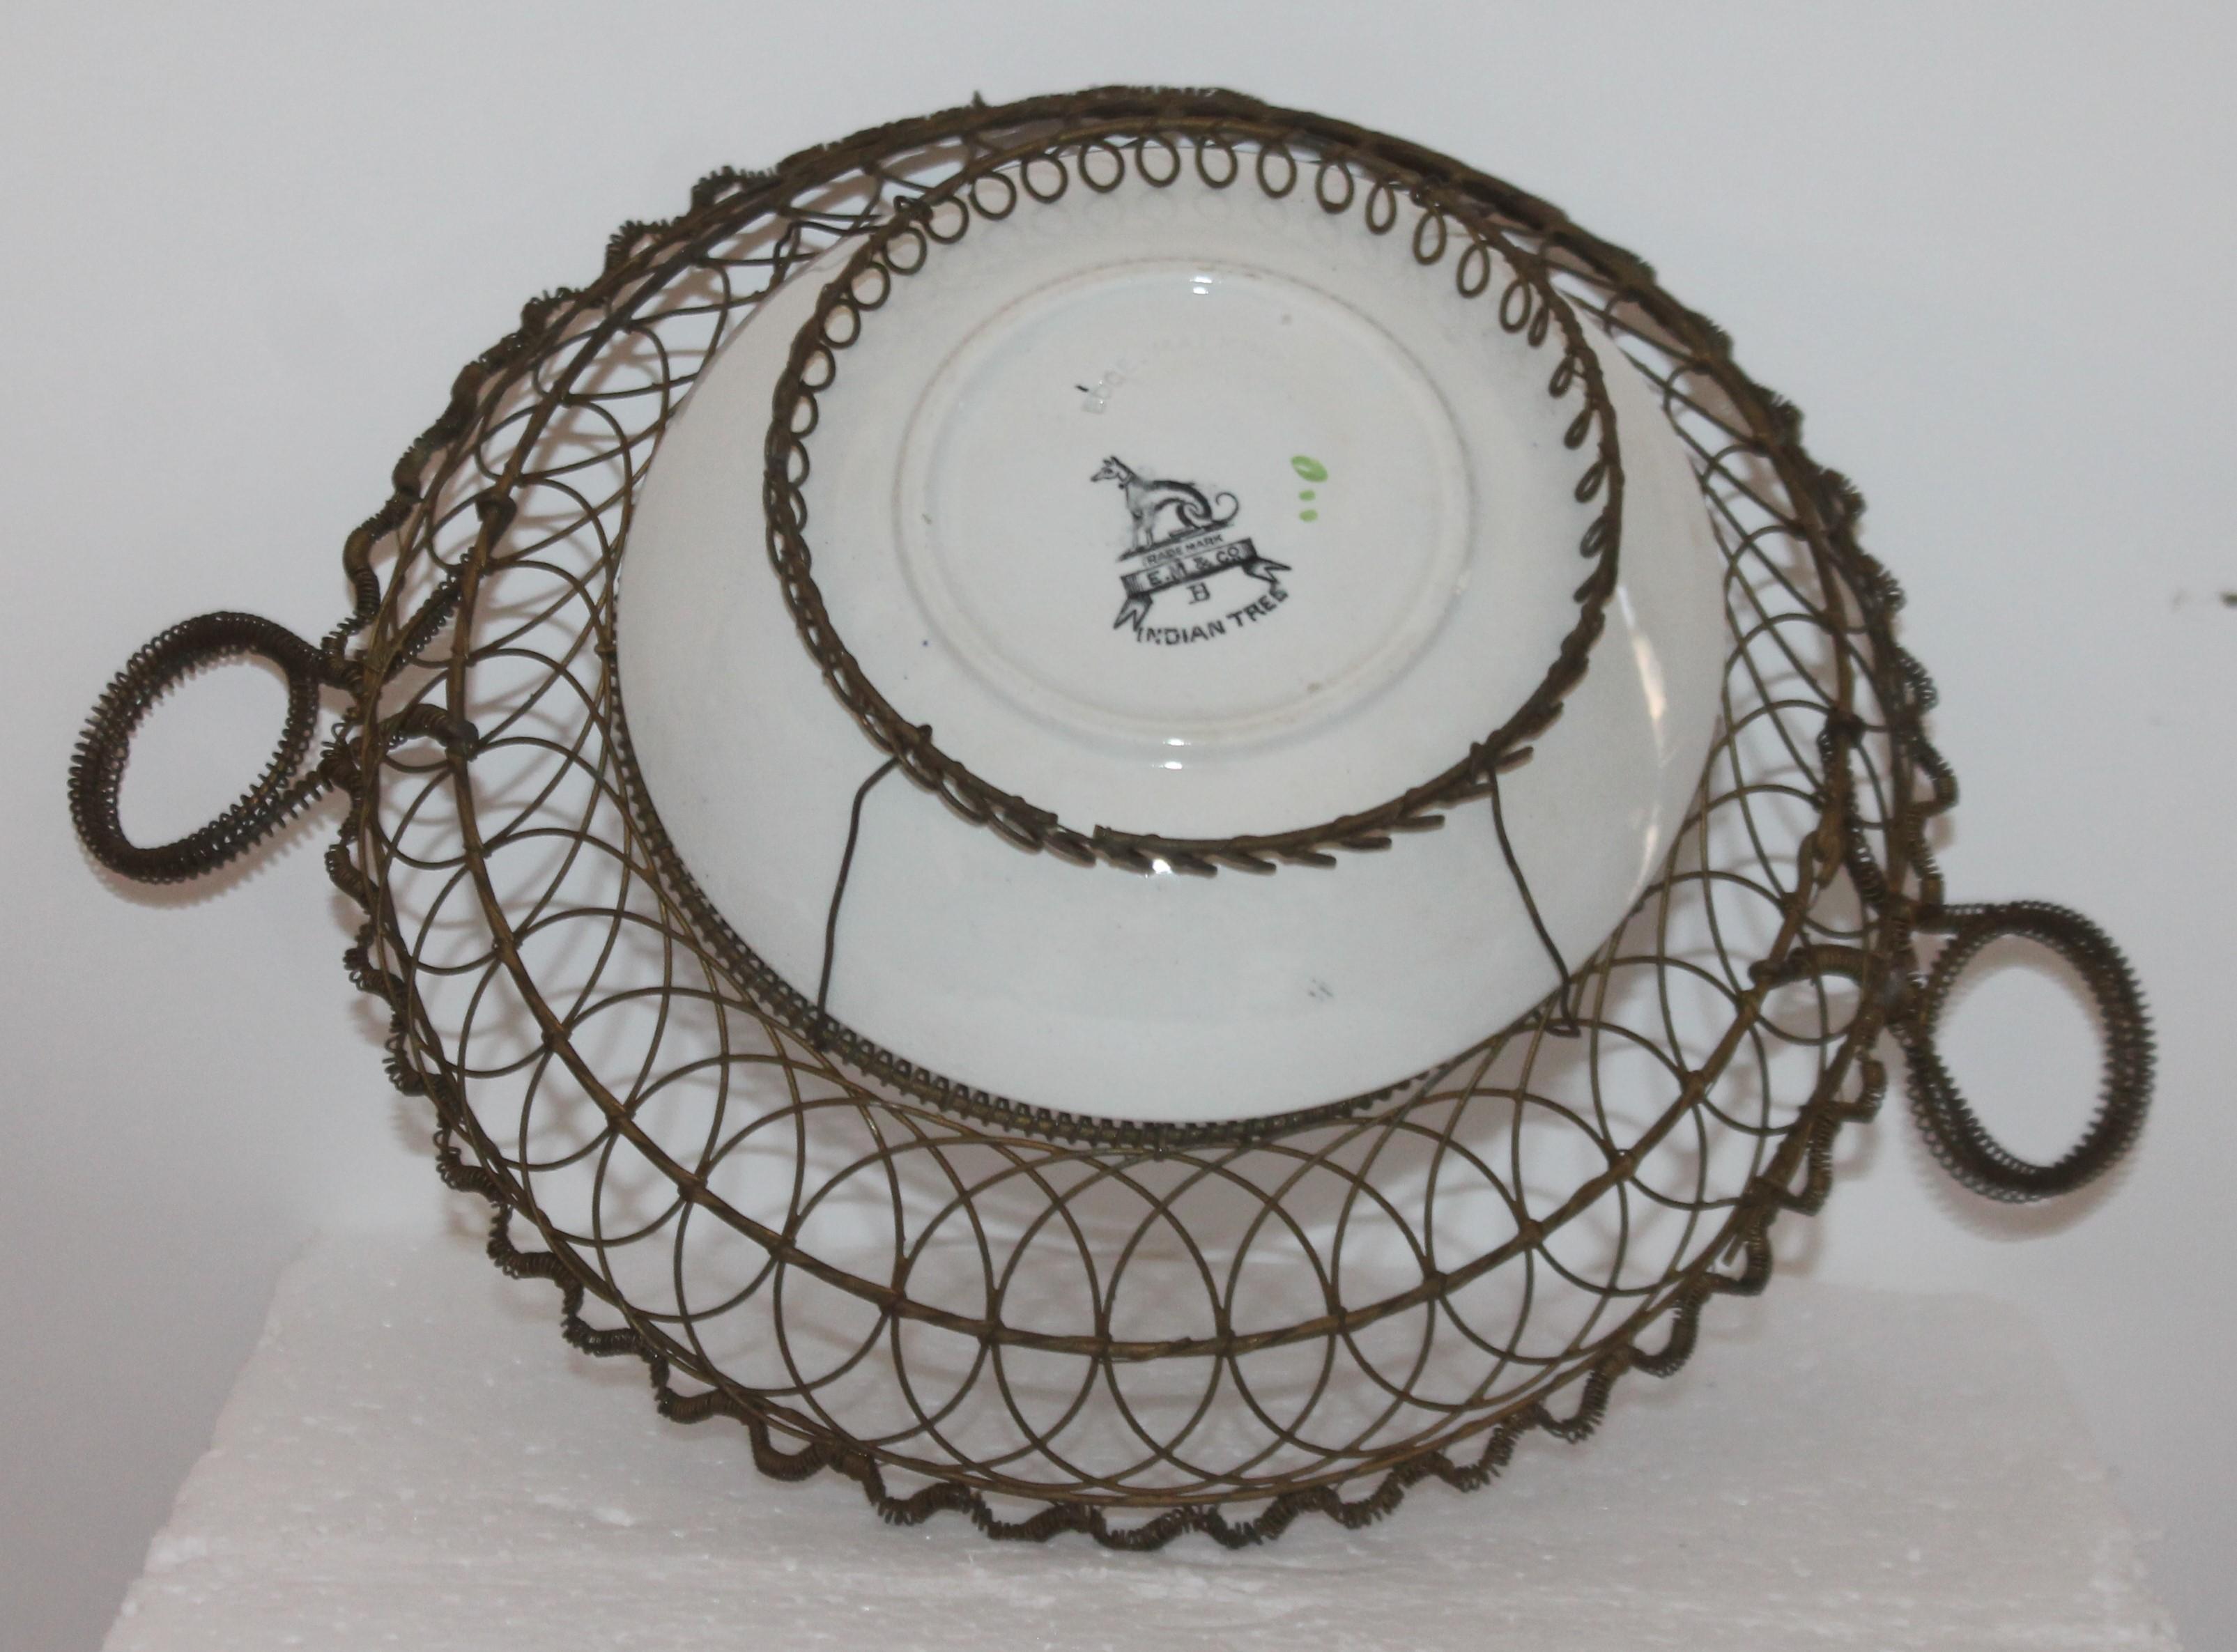 Porcelain 19th Century Handmade Wire Basket from 1870 with a Bowl Inset